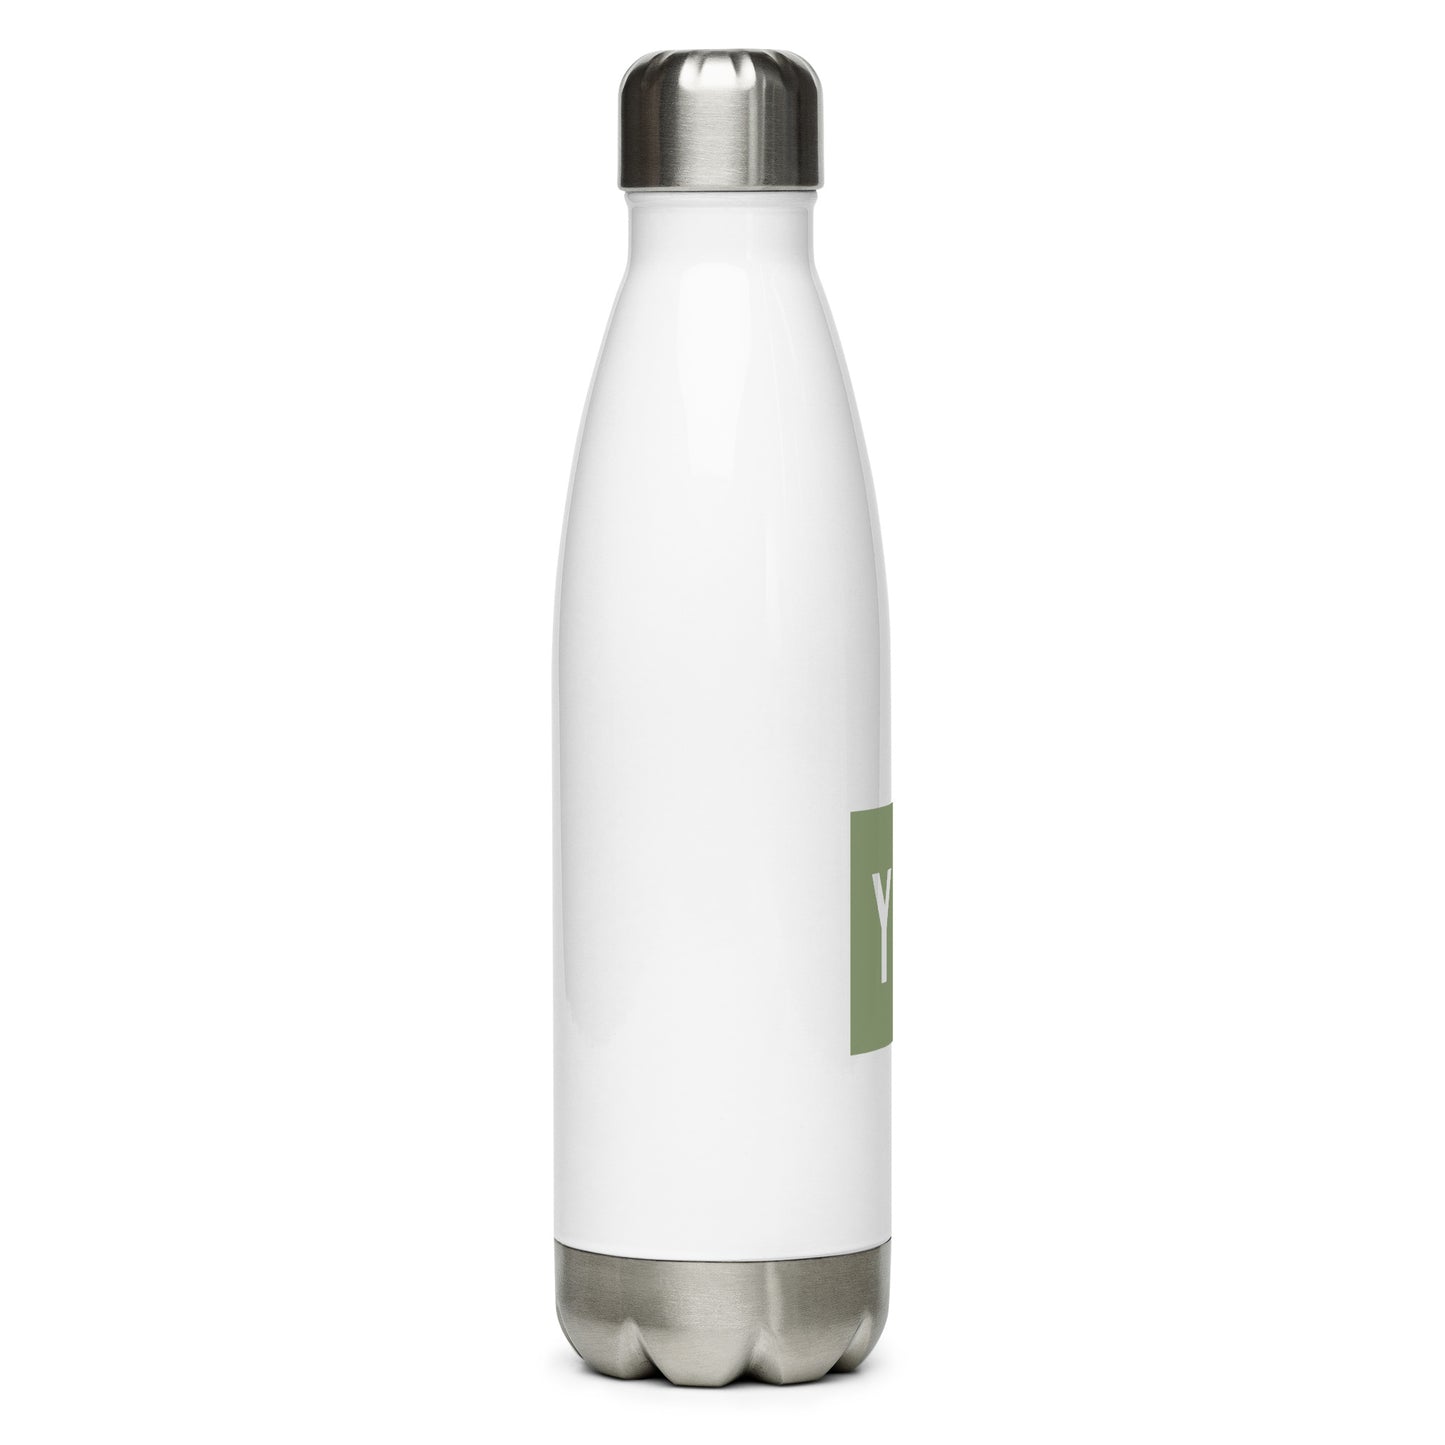 Aviation Gift Water Bottle - Camo Green • YYJ Victoria • YHM Designs - Image 07